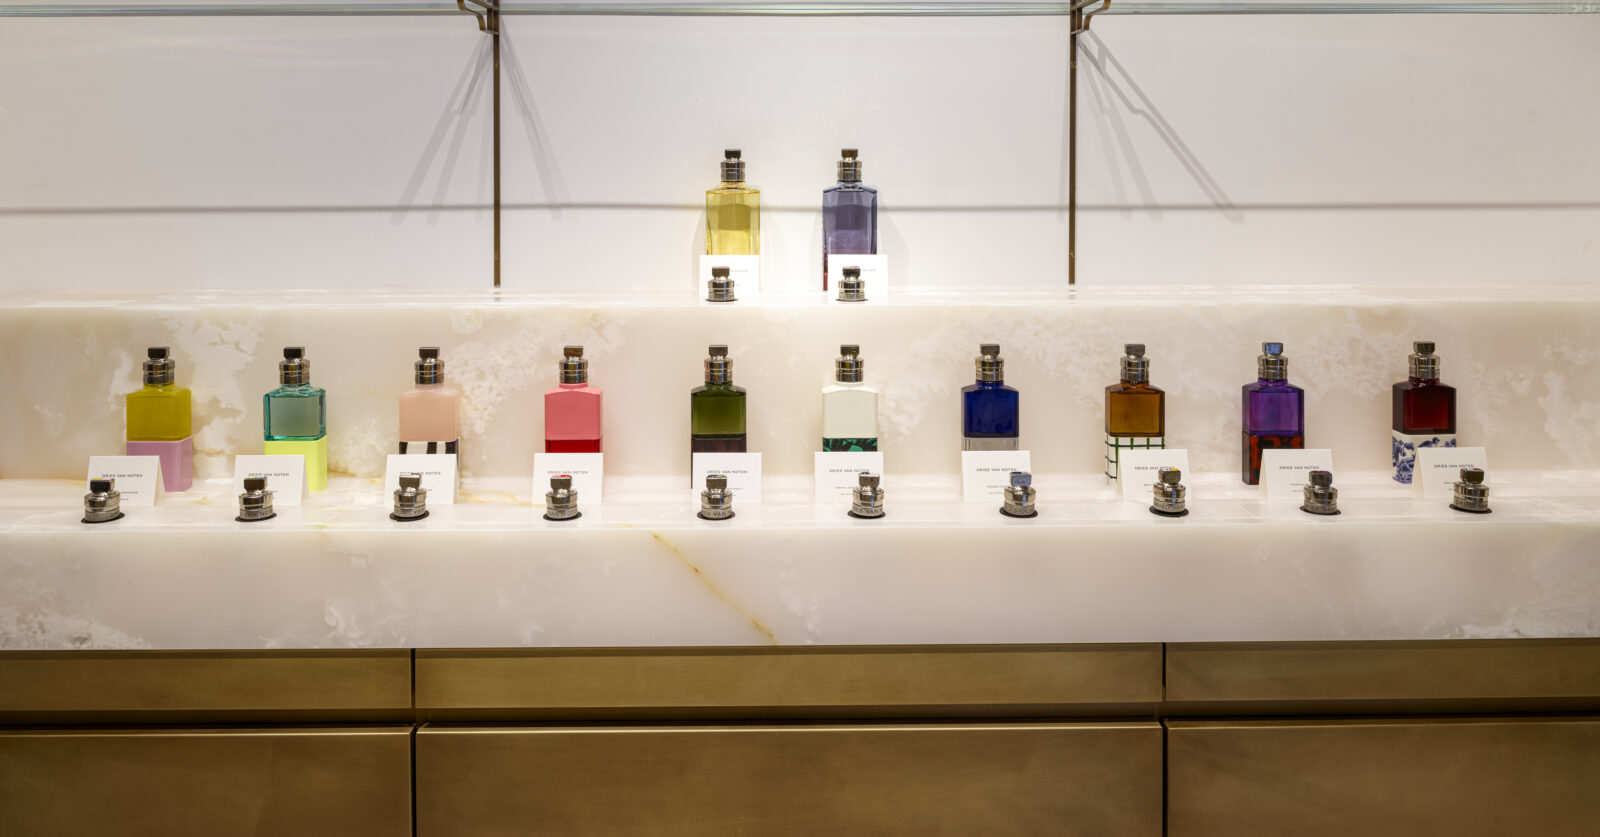 DRIES VAN NOTEN's Unique fragrance line launched this year